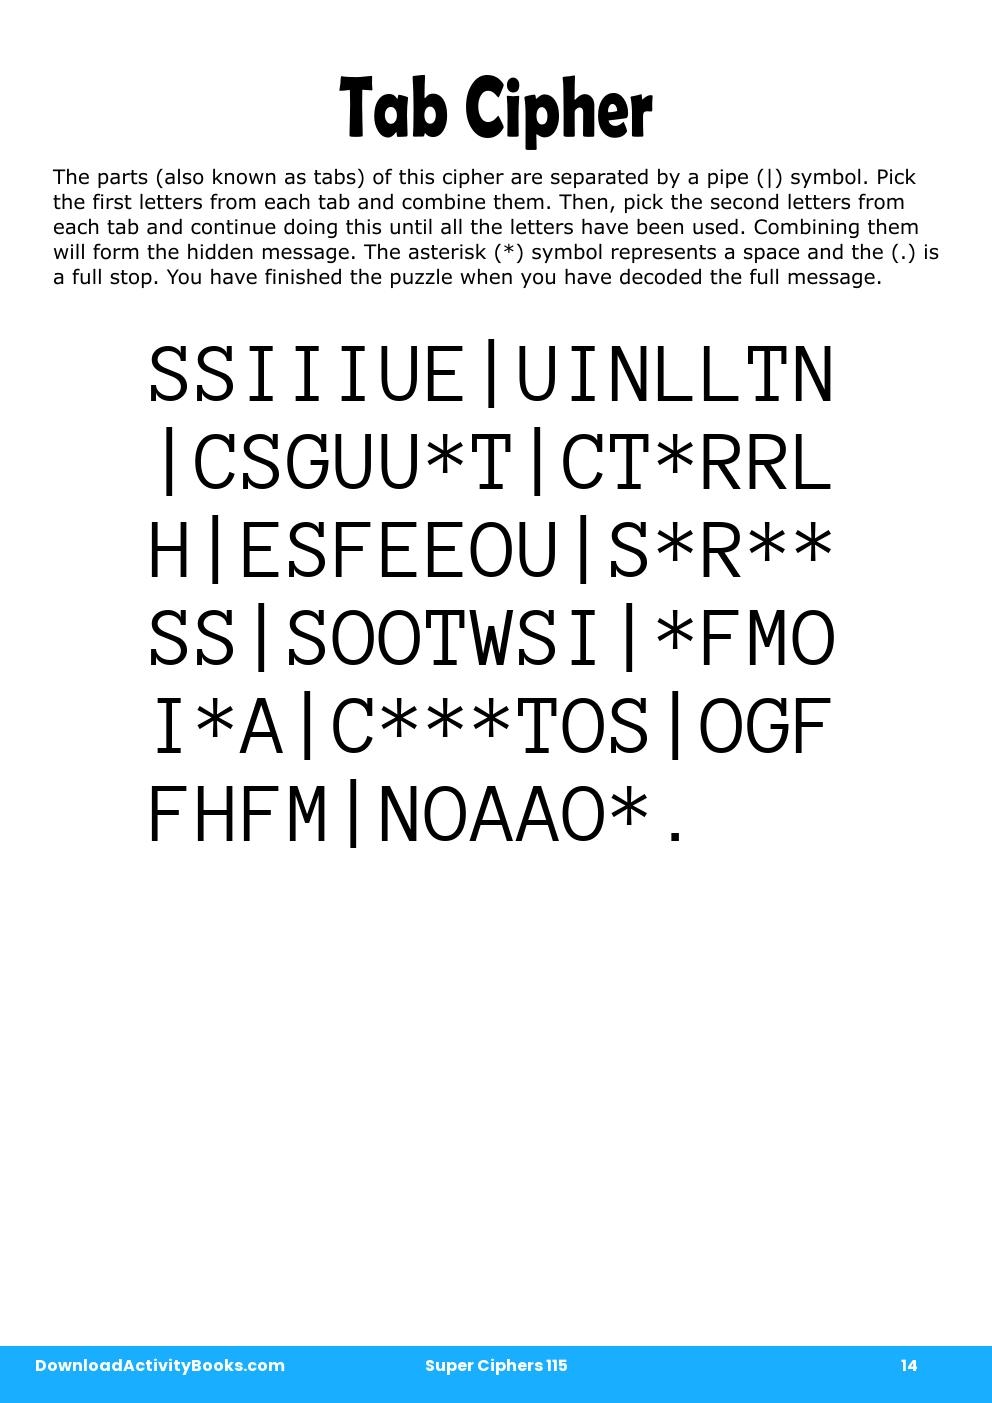 Tab Cipher in Super Ciphers 115